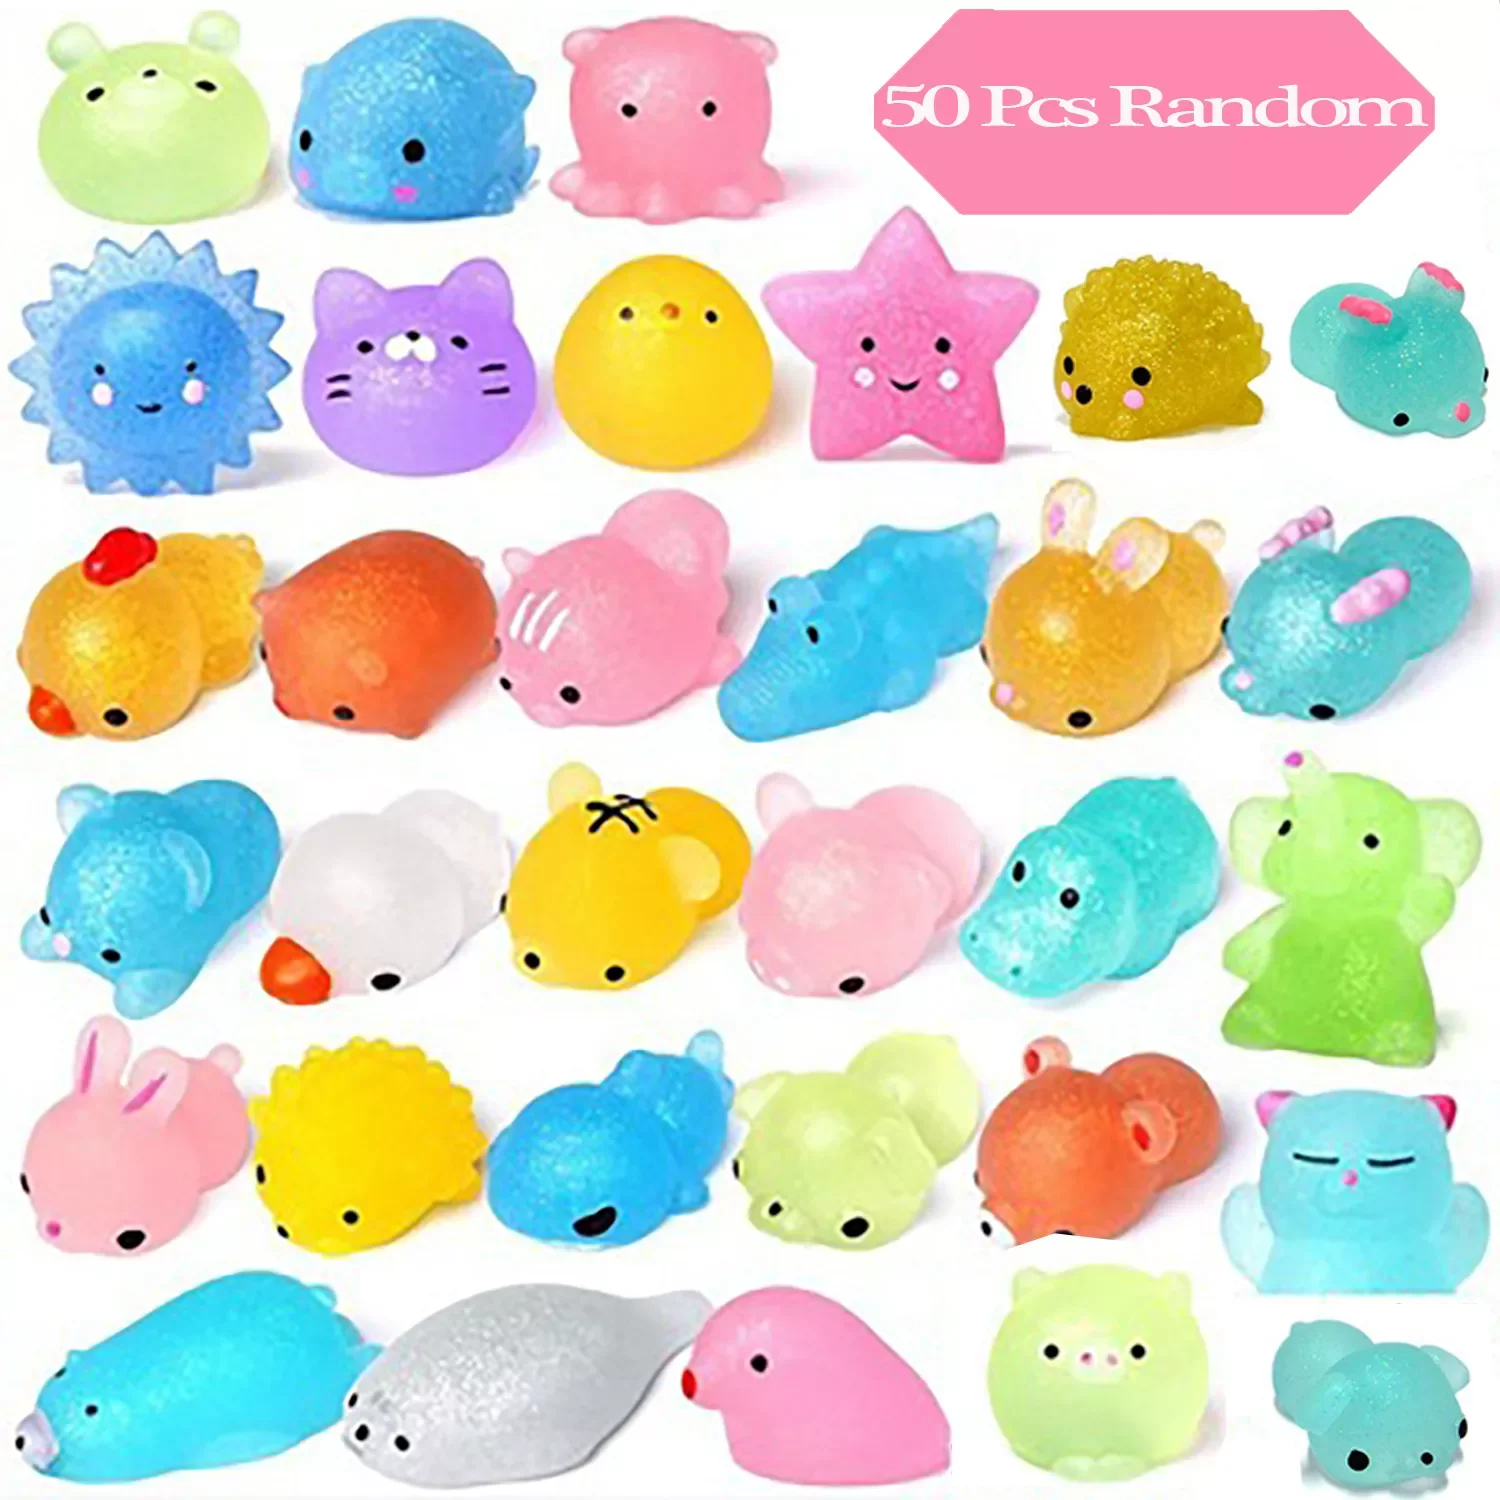 Enlarge Glitter Mochi Squishy Toys Cute Kawaii Squishies Stress Relief Animal Squishys Party Favors for Kids Birthday Gifts